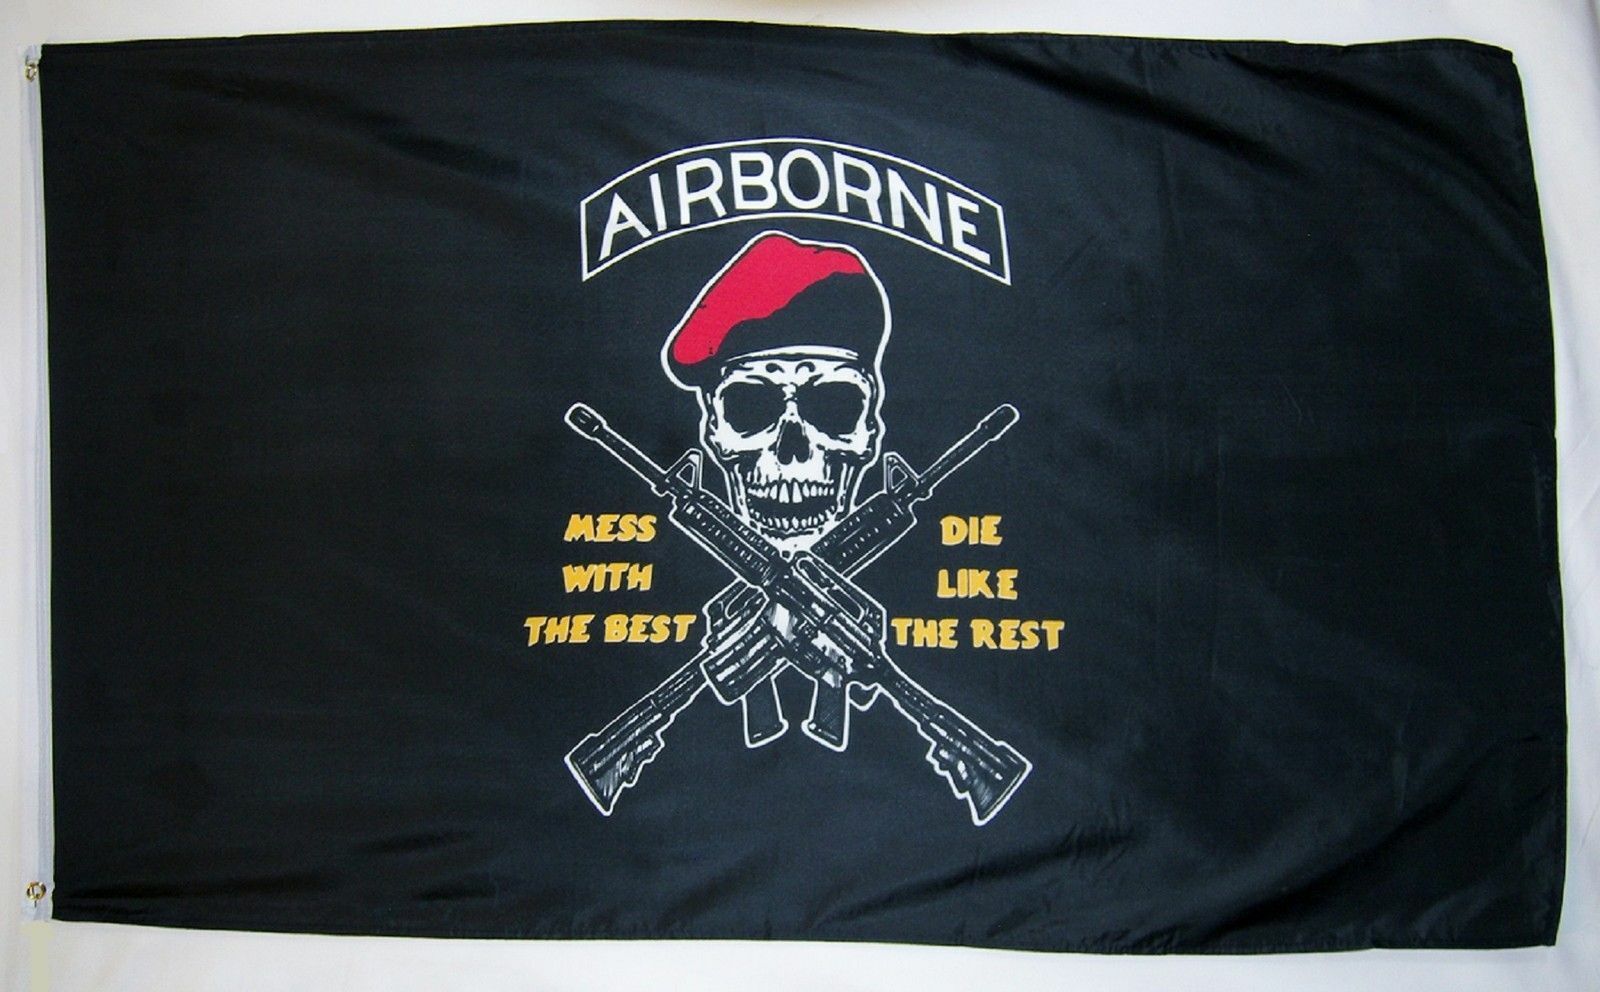 3x5 Airborne Mess With The Best Die Like The Rest Flag 3' x 5' Indoor Outdoor 